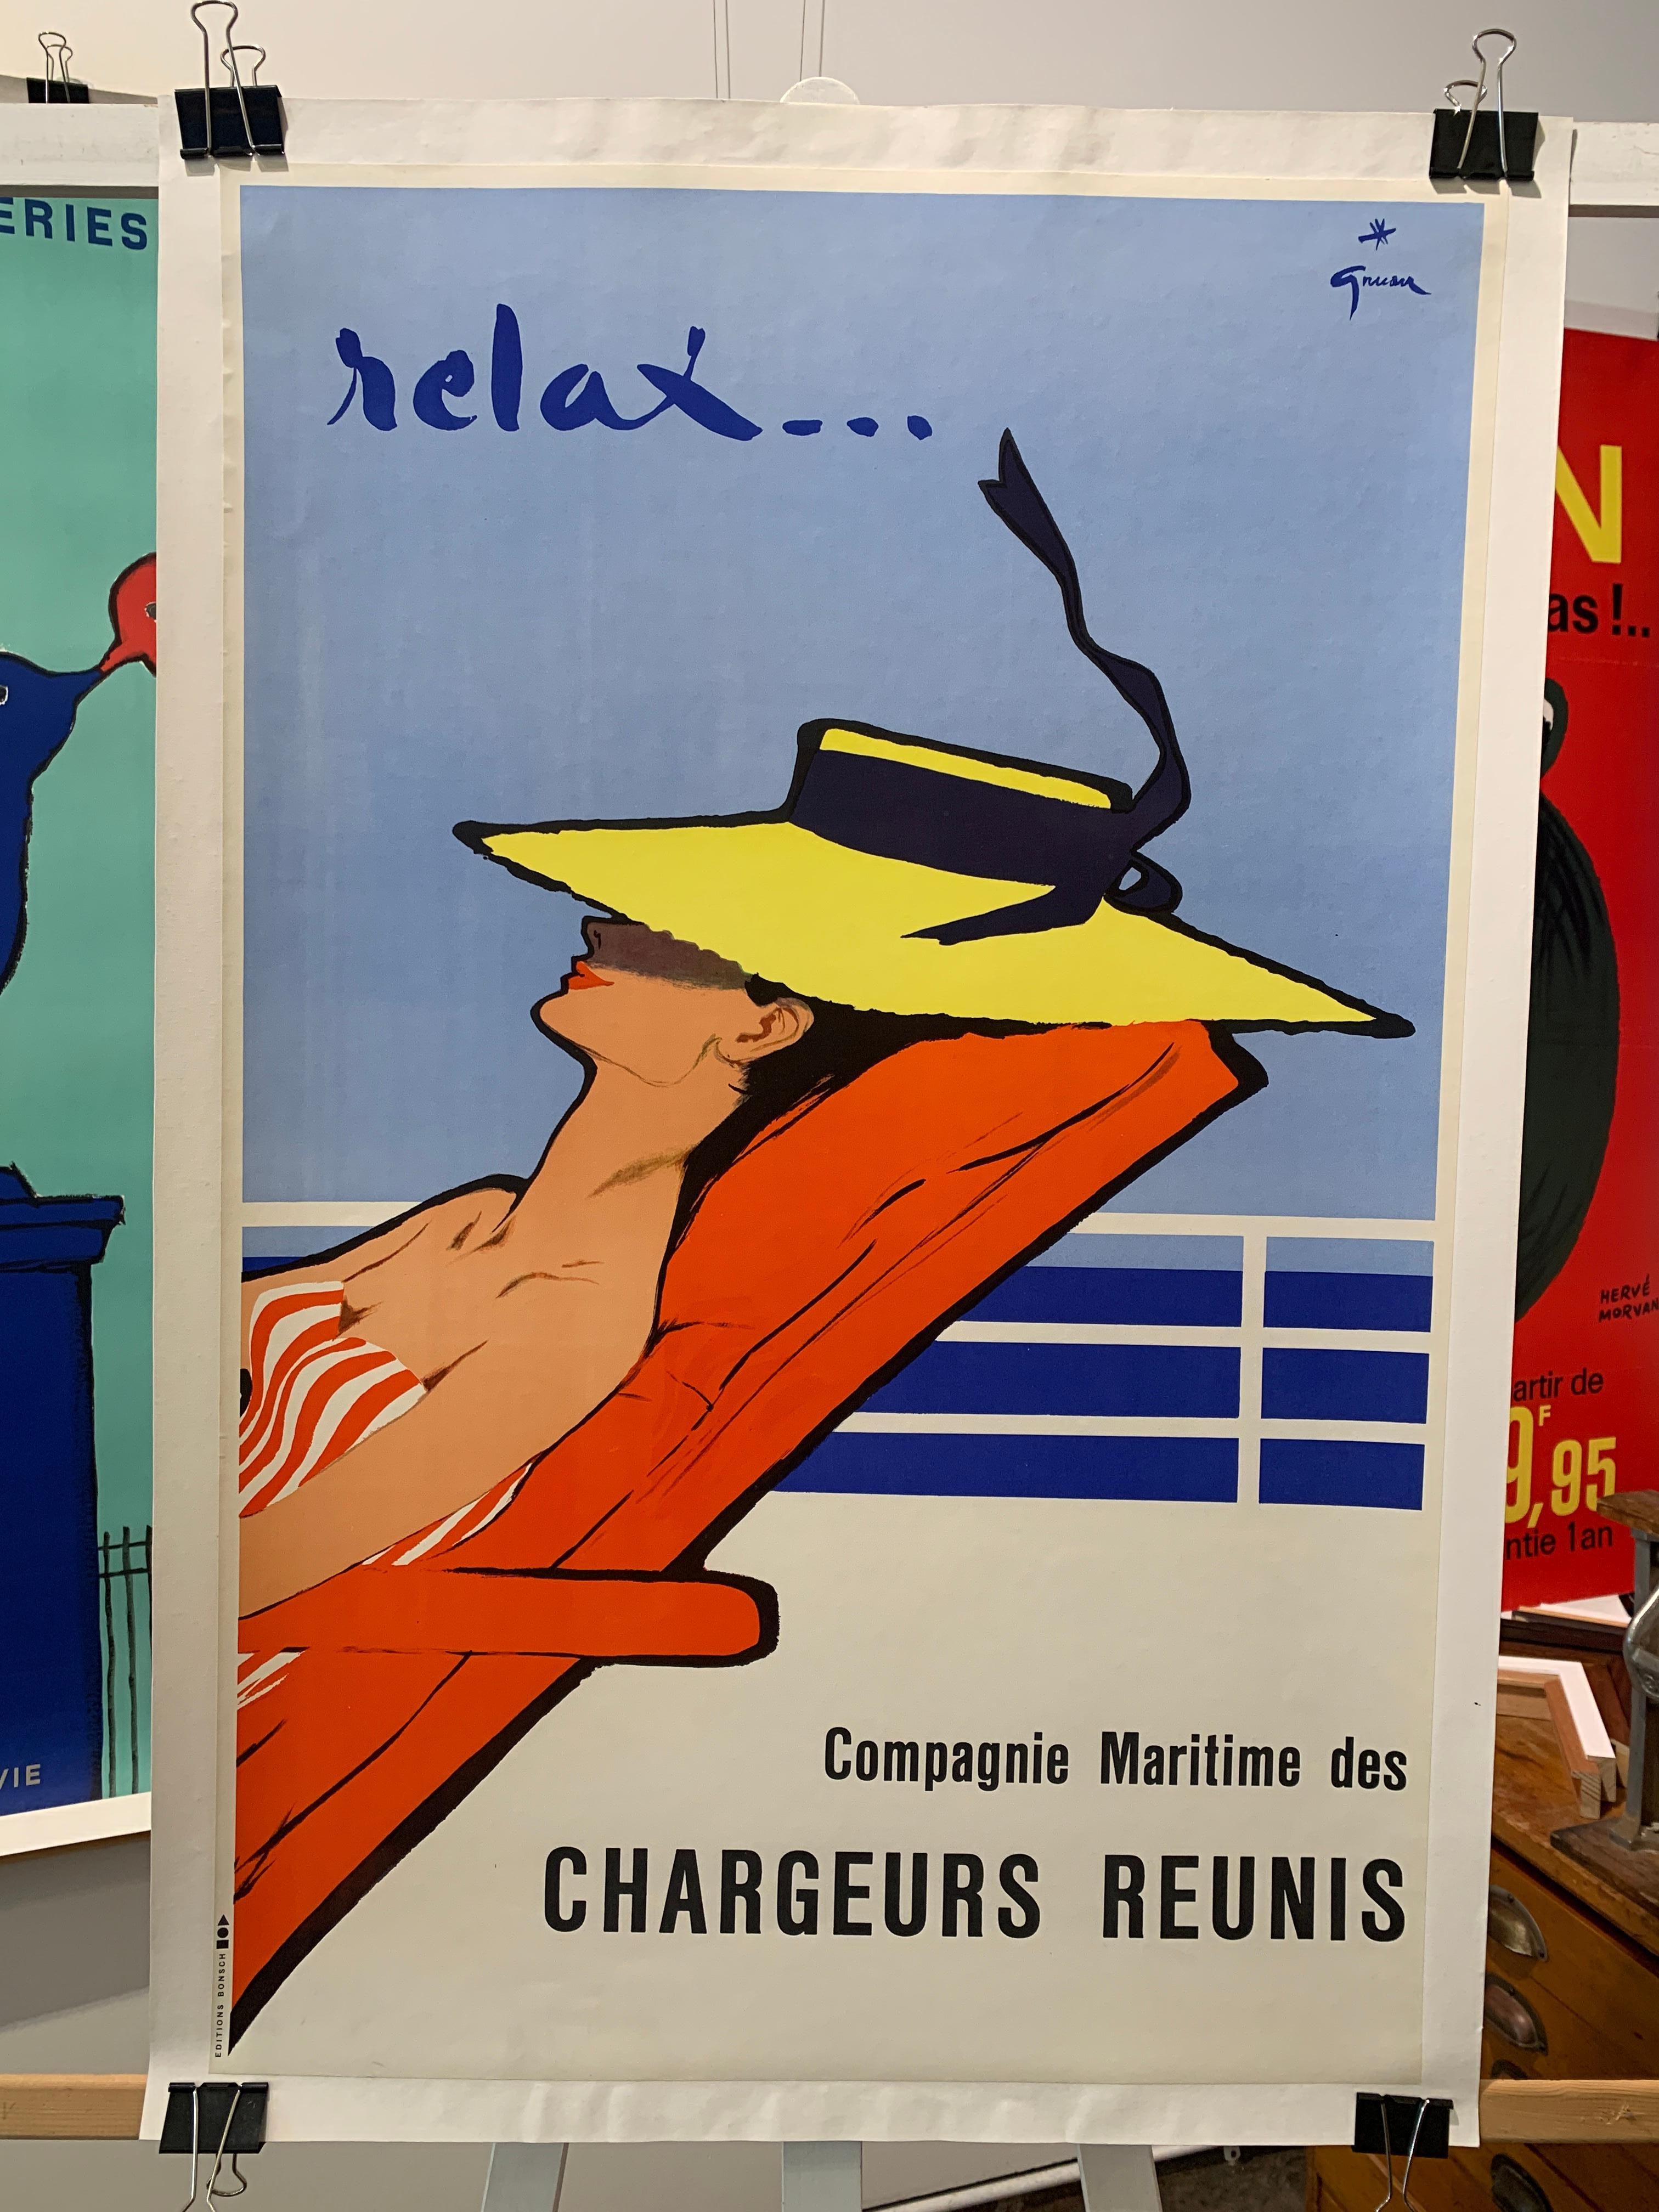 Original Vintage Poster, 'Relax' 1964 by Rene Gruau

The fifties were the last flowering of the golden age of the ocean liner, which would soon be usurped by the jet plane. During the decade, transatlantic crossings were joined by a strong increase